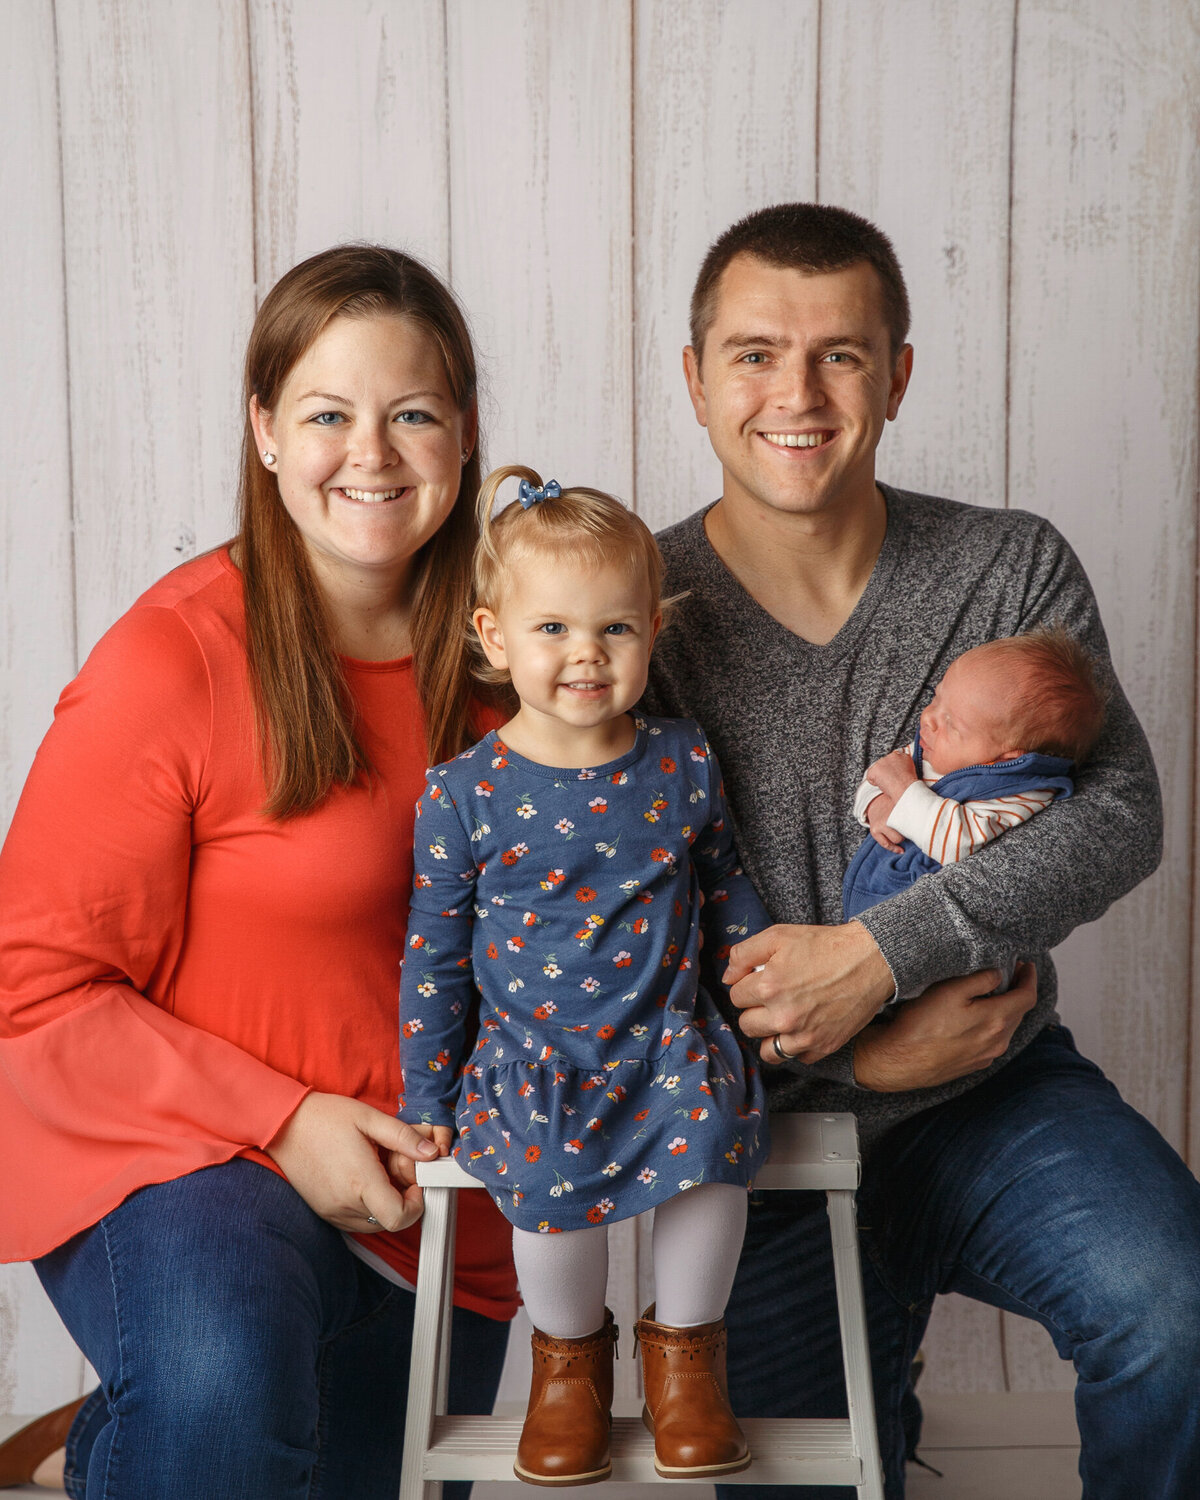 Family Portrait of Mom and dad with young daughter and newborn baby boy